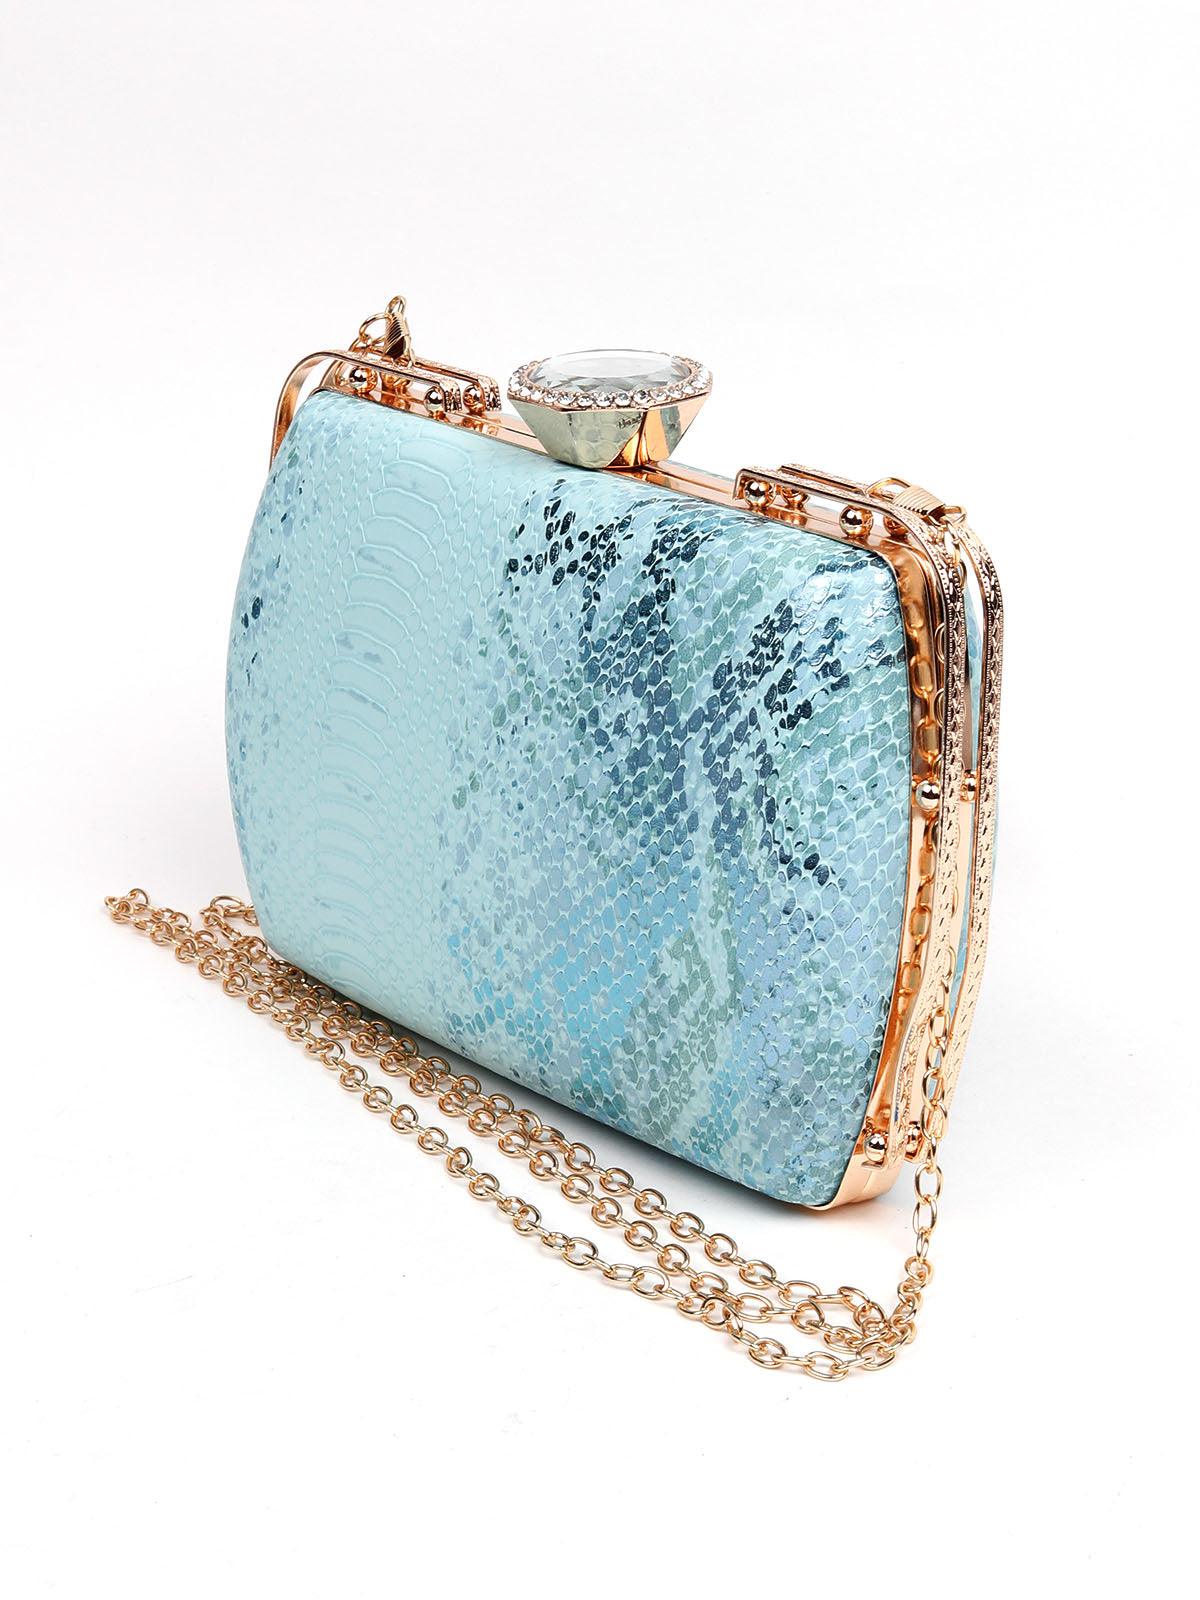 Beautiful beachy blue textured sling bag - Odette